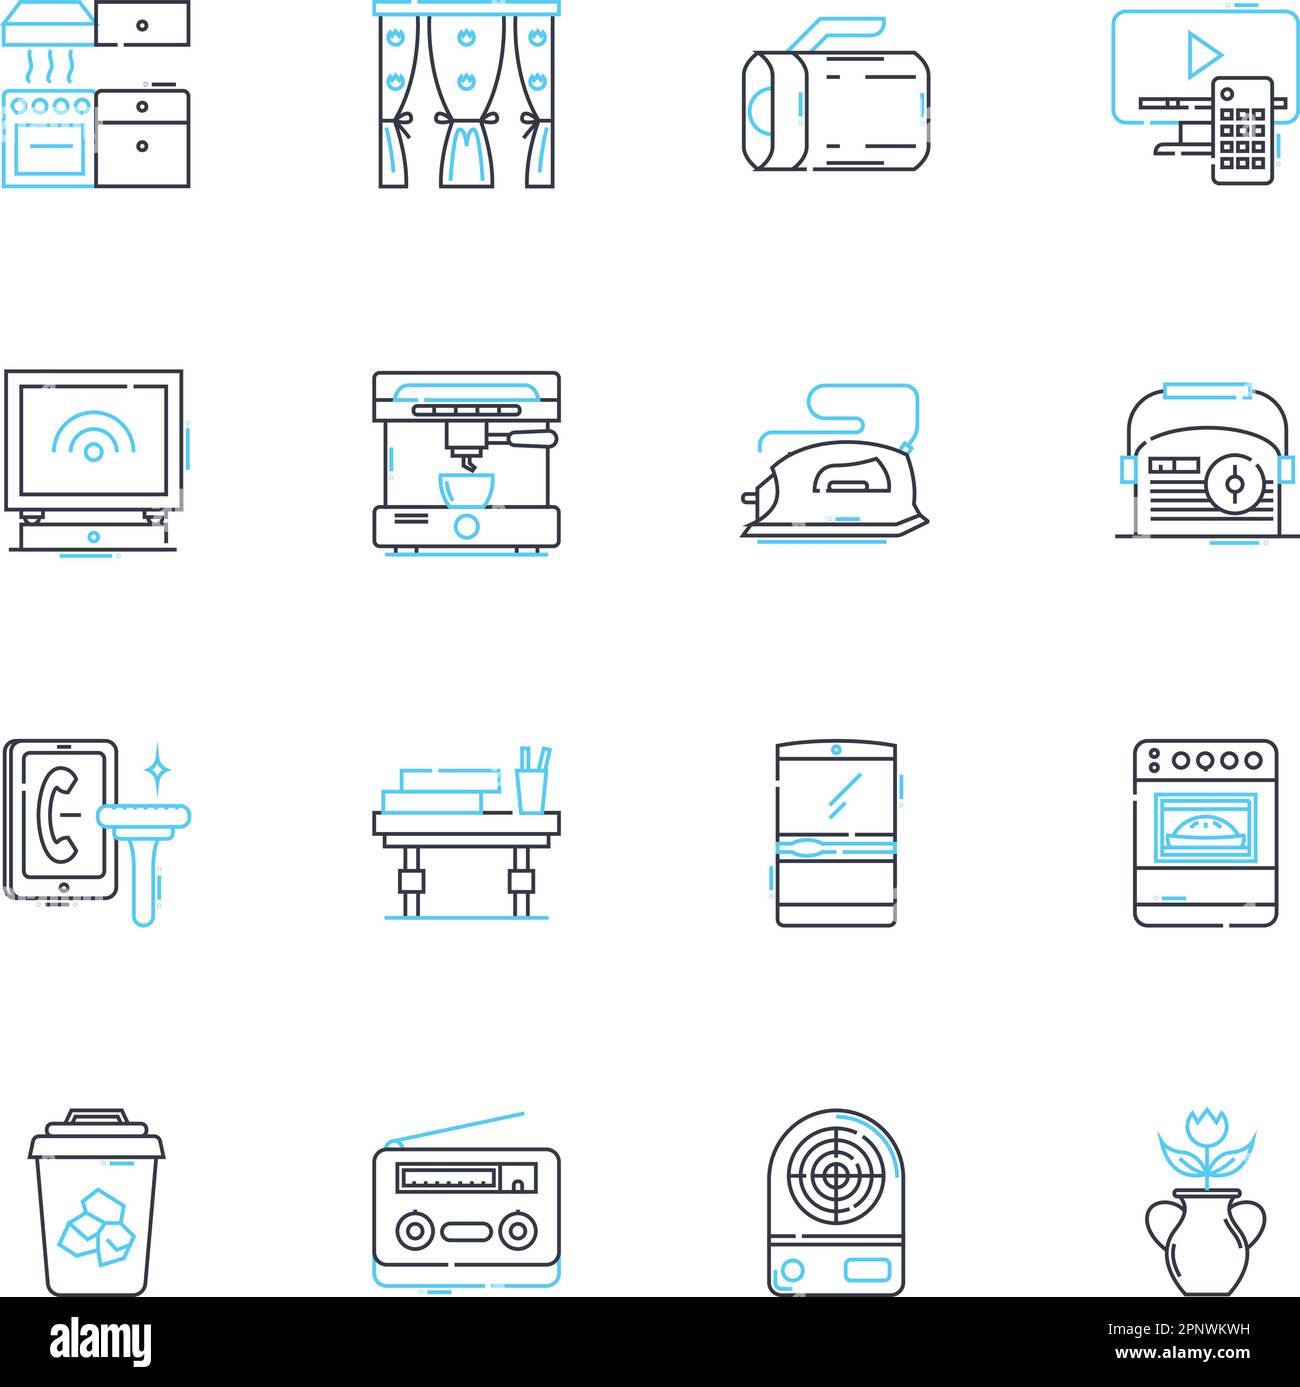 Electrical appliances linear icons set. Microwave, Blender, Toaster, Mixer, Juicer, Coffee maker, Electric kettle line vector and concept signs. Iron Stock Vector